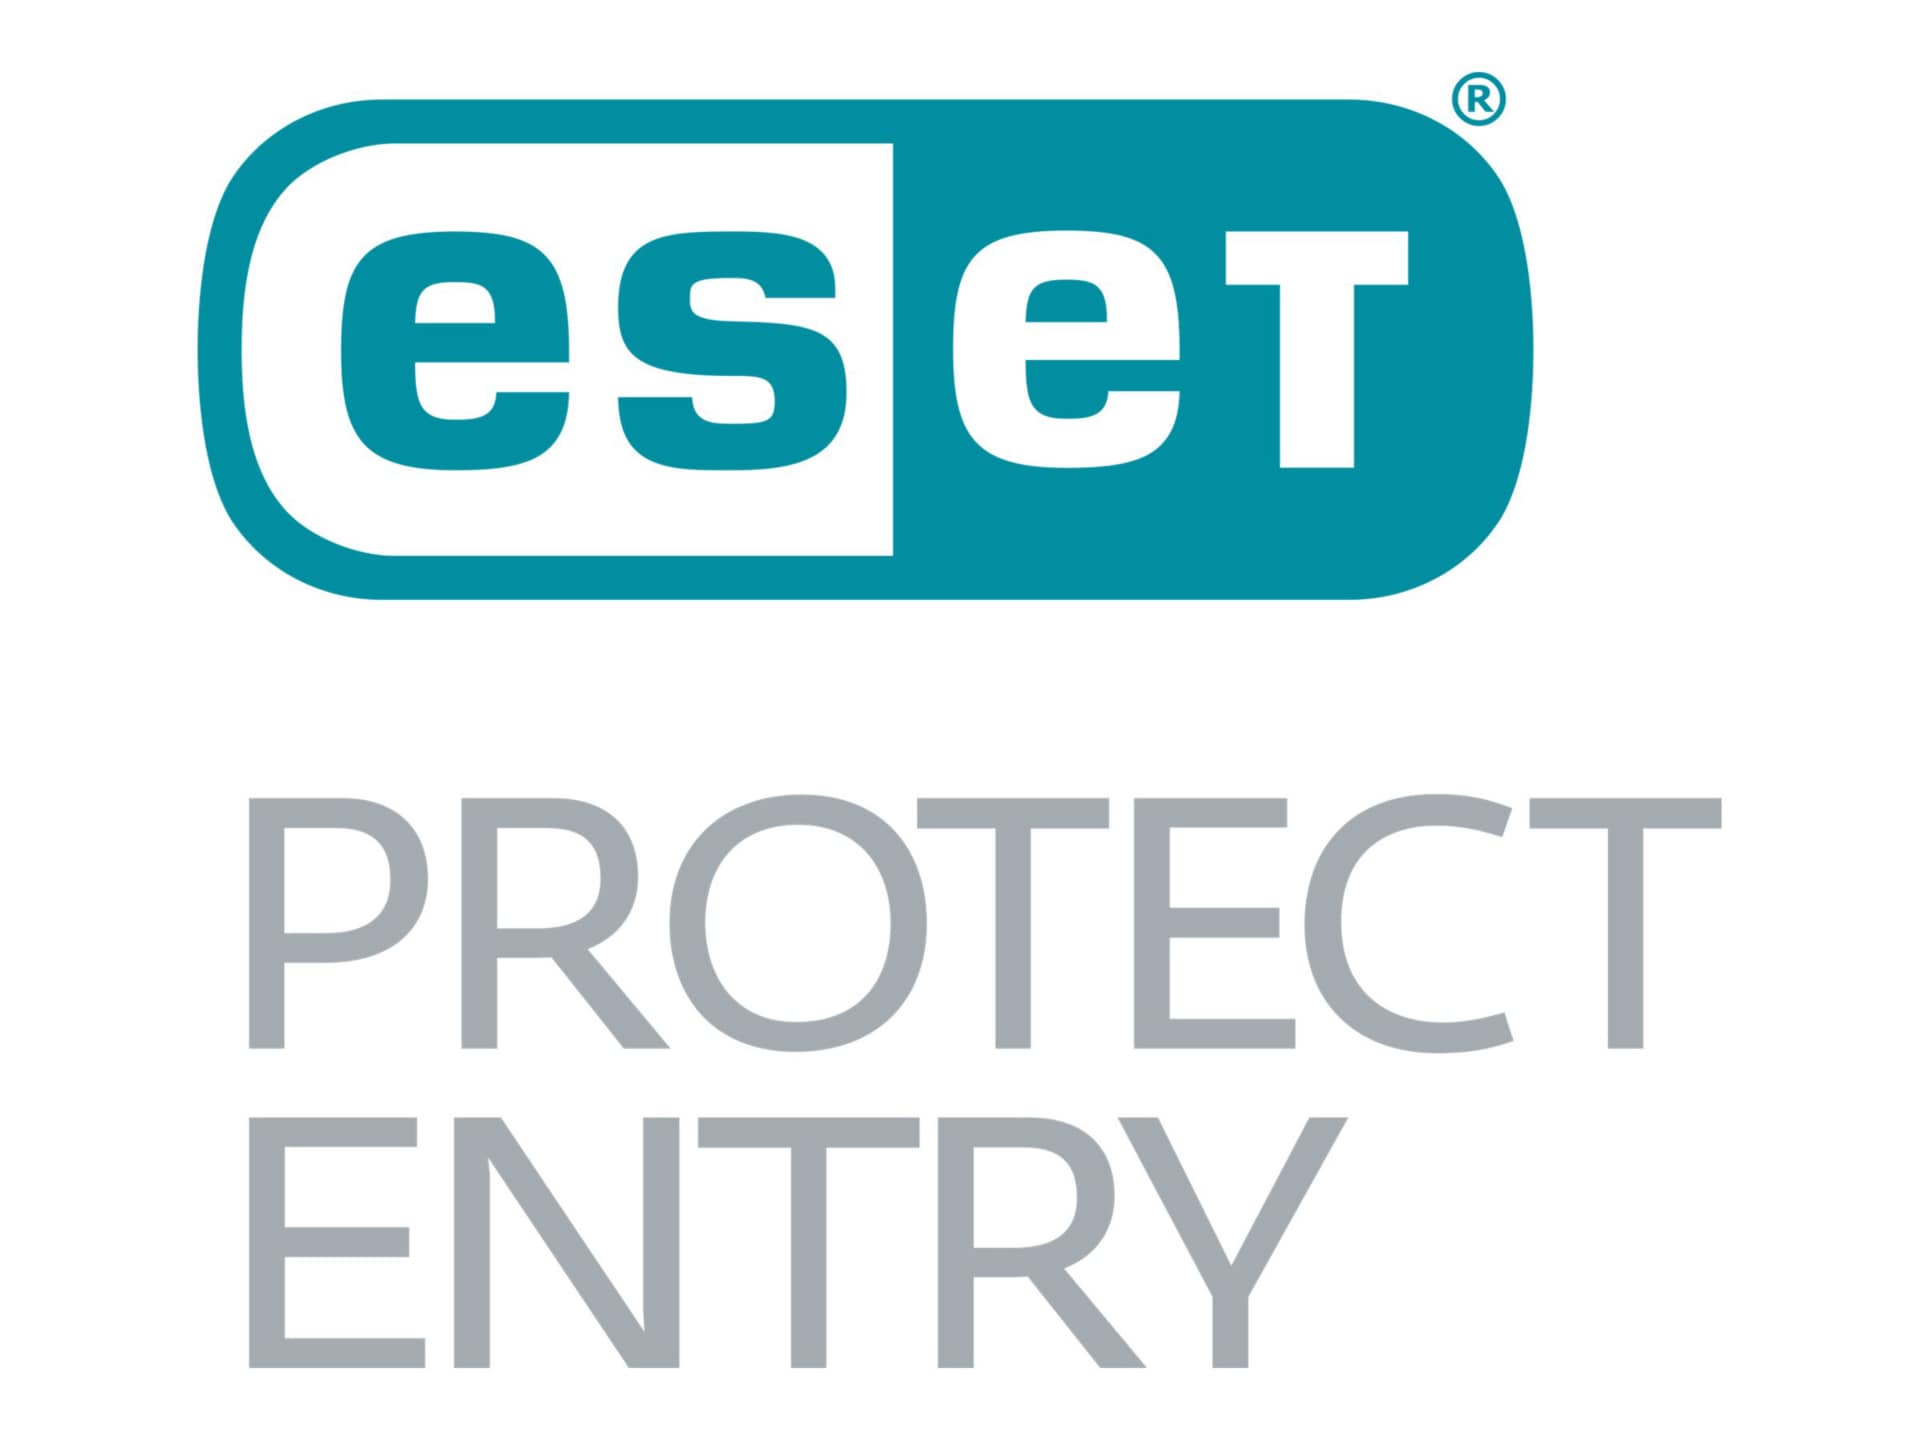 ESET PROTECT Entry - subscription license renewal (3 years) - 1 user